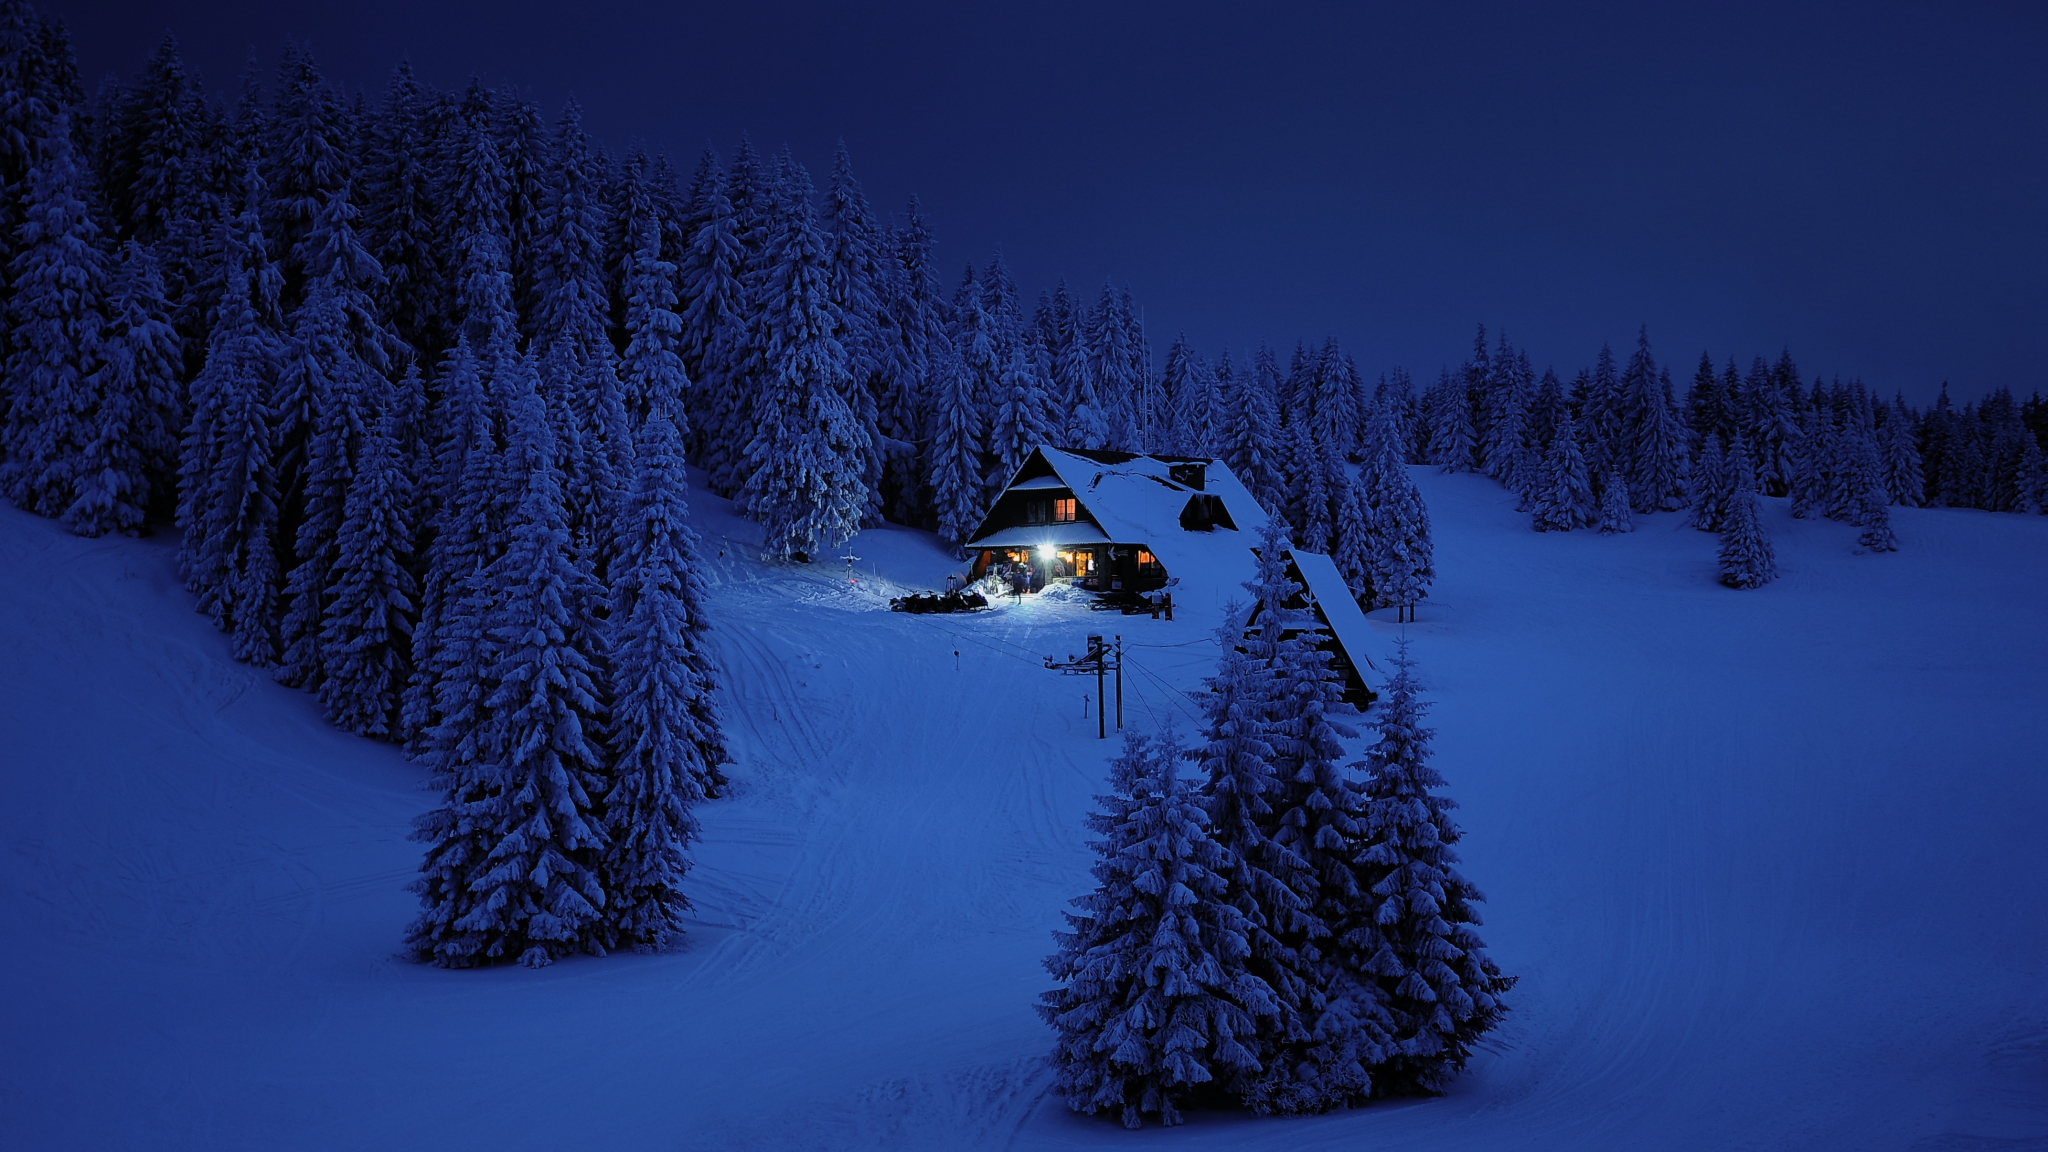 Download wallpaper 2048x1152 house, night, winter, trees, snow layer